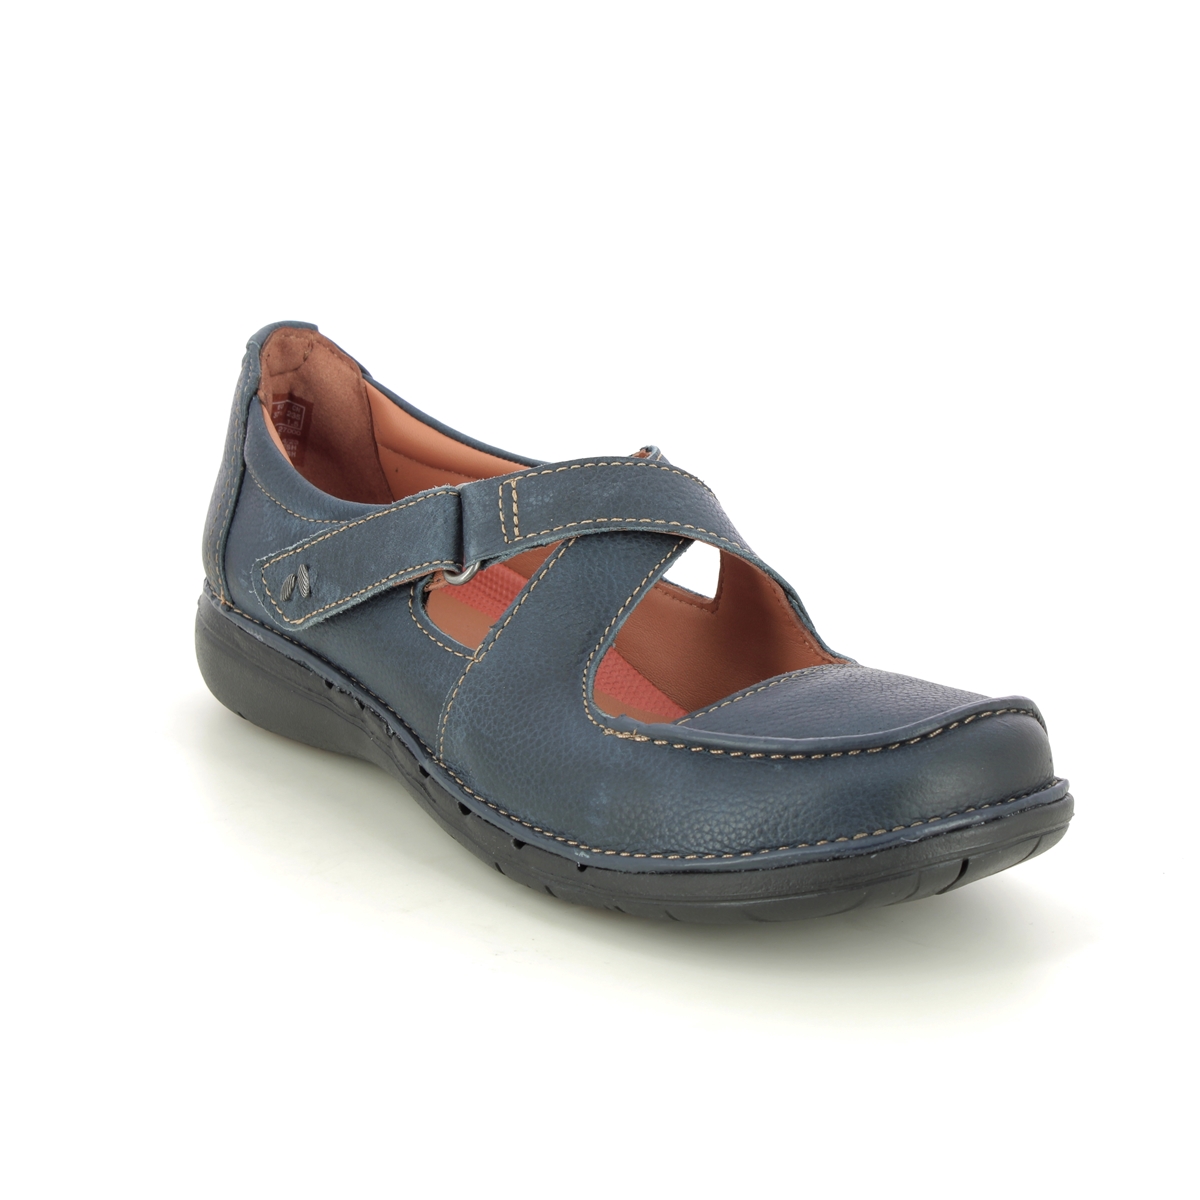 Clarks Un Loop Strap Navy Leather Womens Mary Jane Shoes 749724D In Size 5.5 In Plain Navy Leather